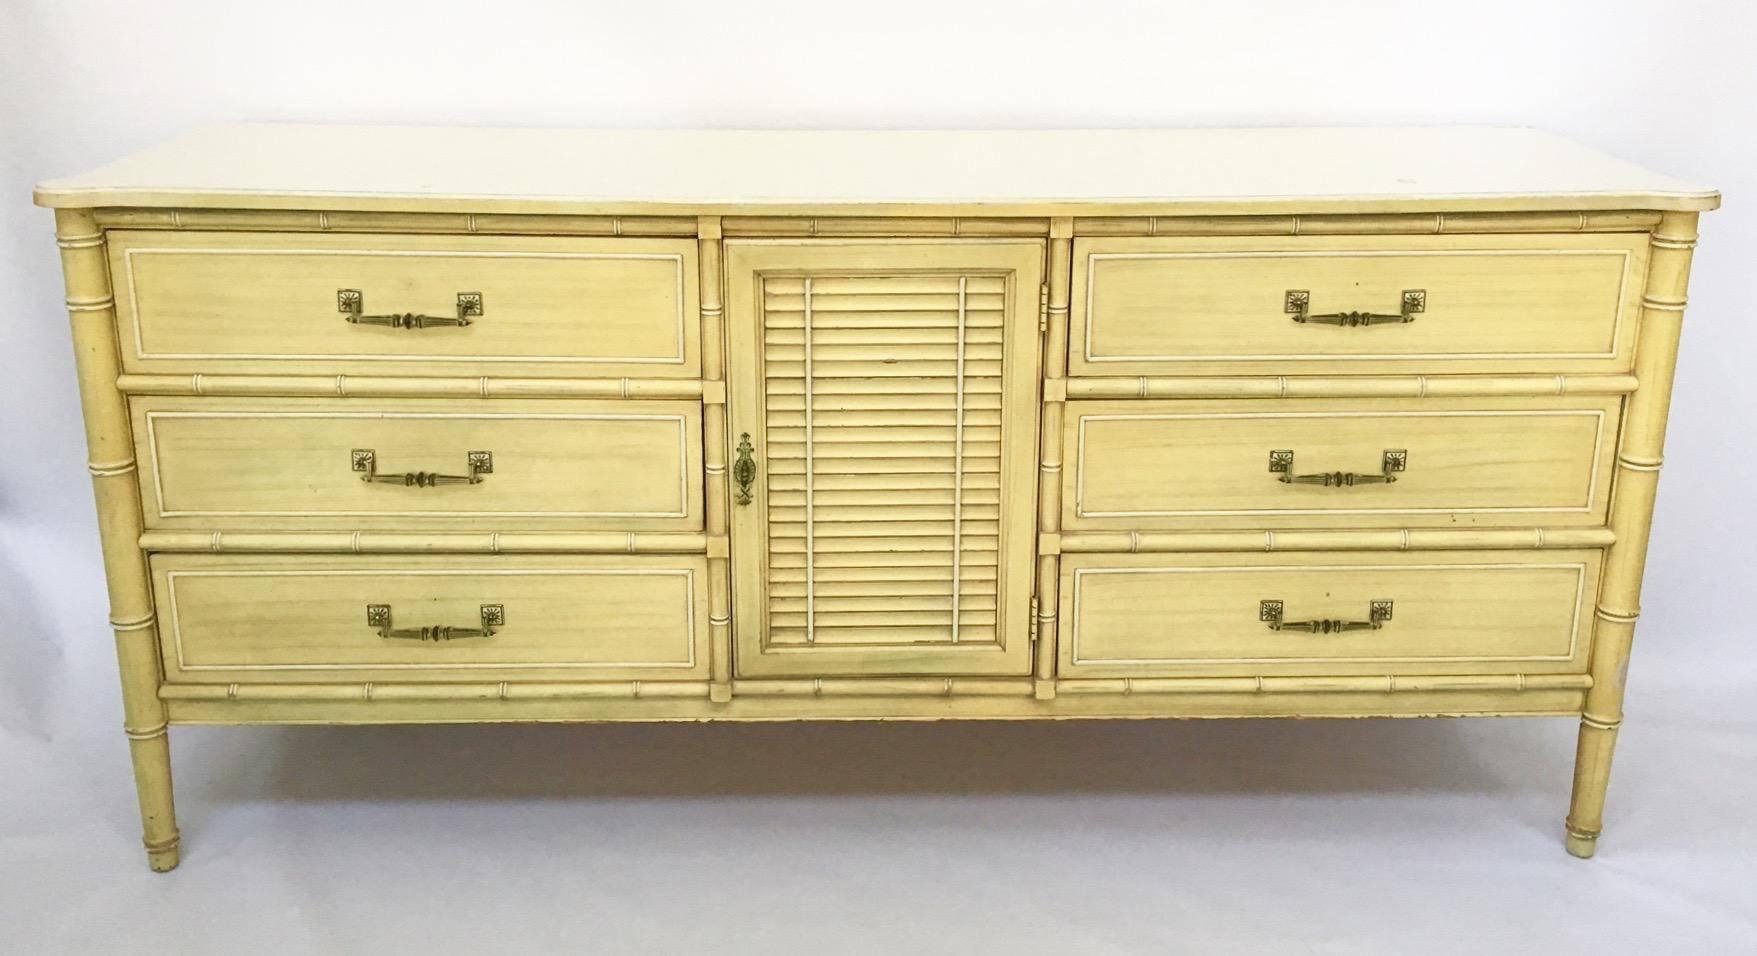 A vintage Bali Hai dresser by Henry Link with faux bamboo accents. Centre door reveals three interior drawers. All original finish. Good as-found vintage condition with some imperfections consistent with age. 

As always, all reasonable offers